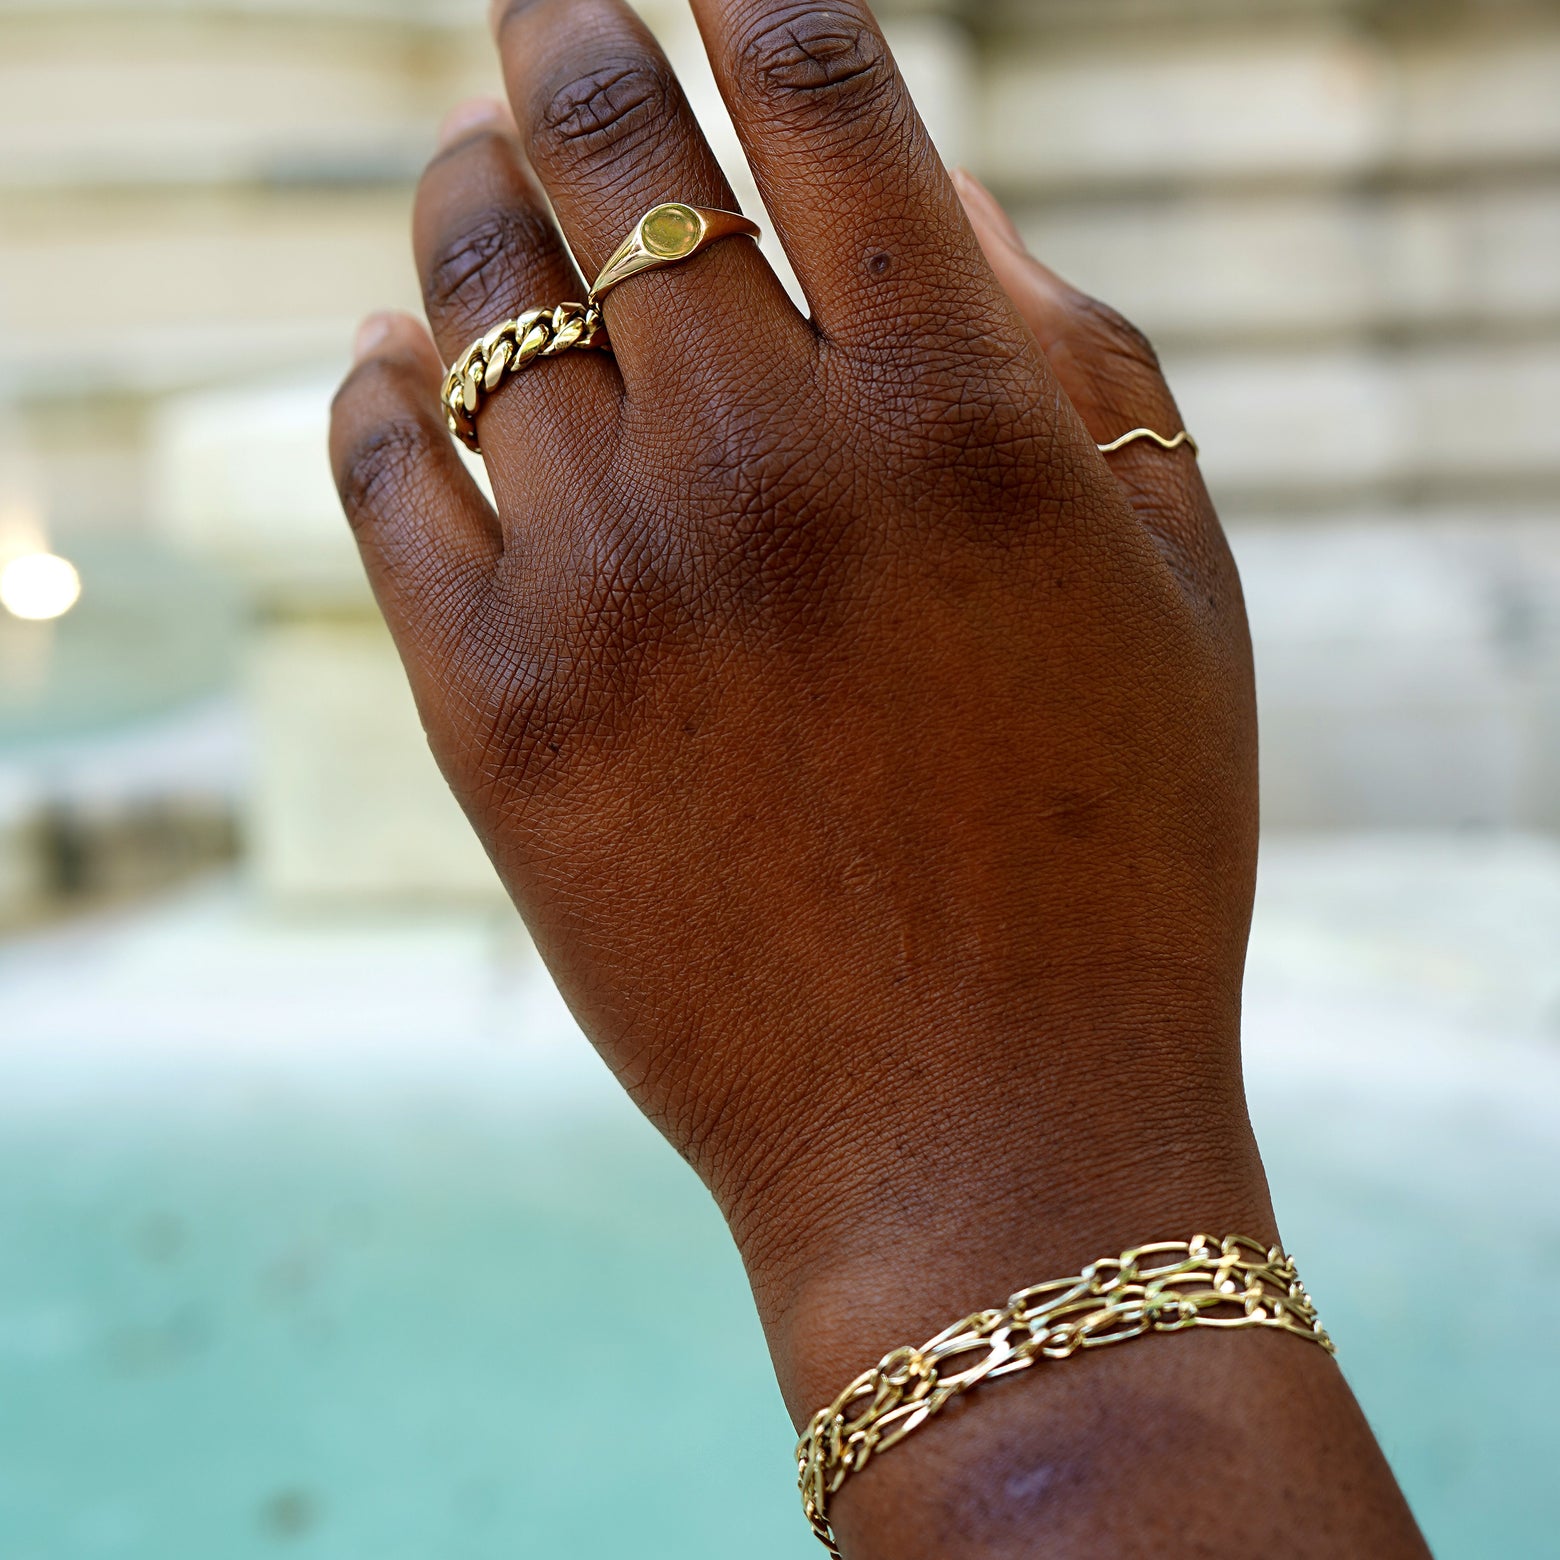 A model's hand posed in front a building wearing One to One Bracelets, a Wave Ring, a Signet Ring, and a Miami Cuban Ring